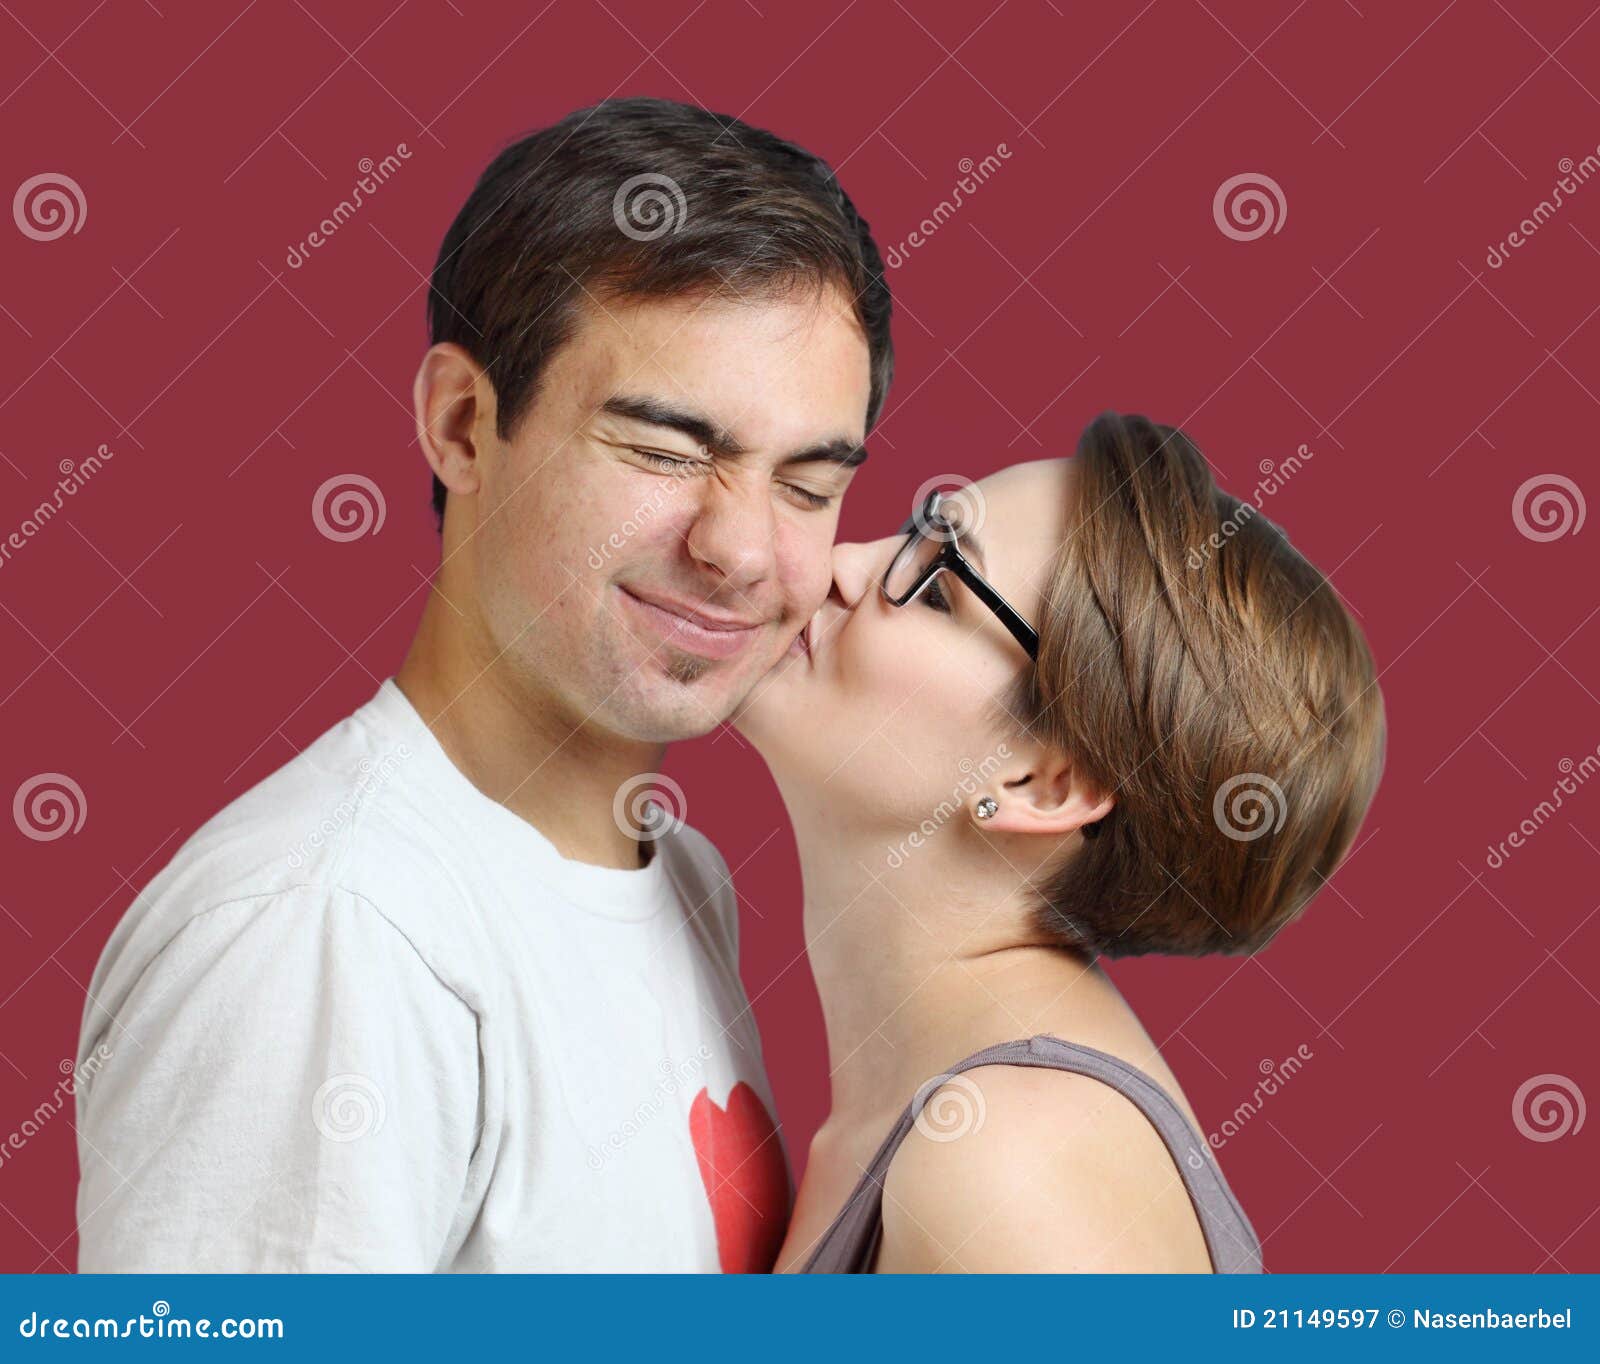 Peck on the cheek meaning